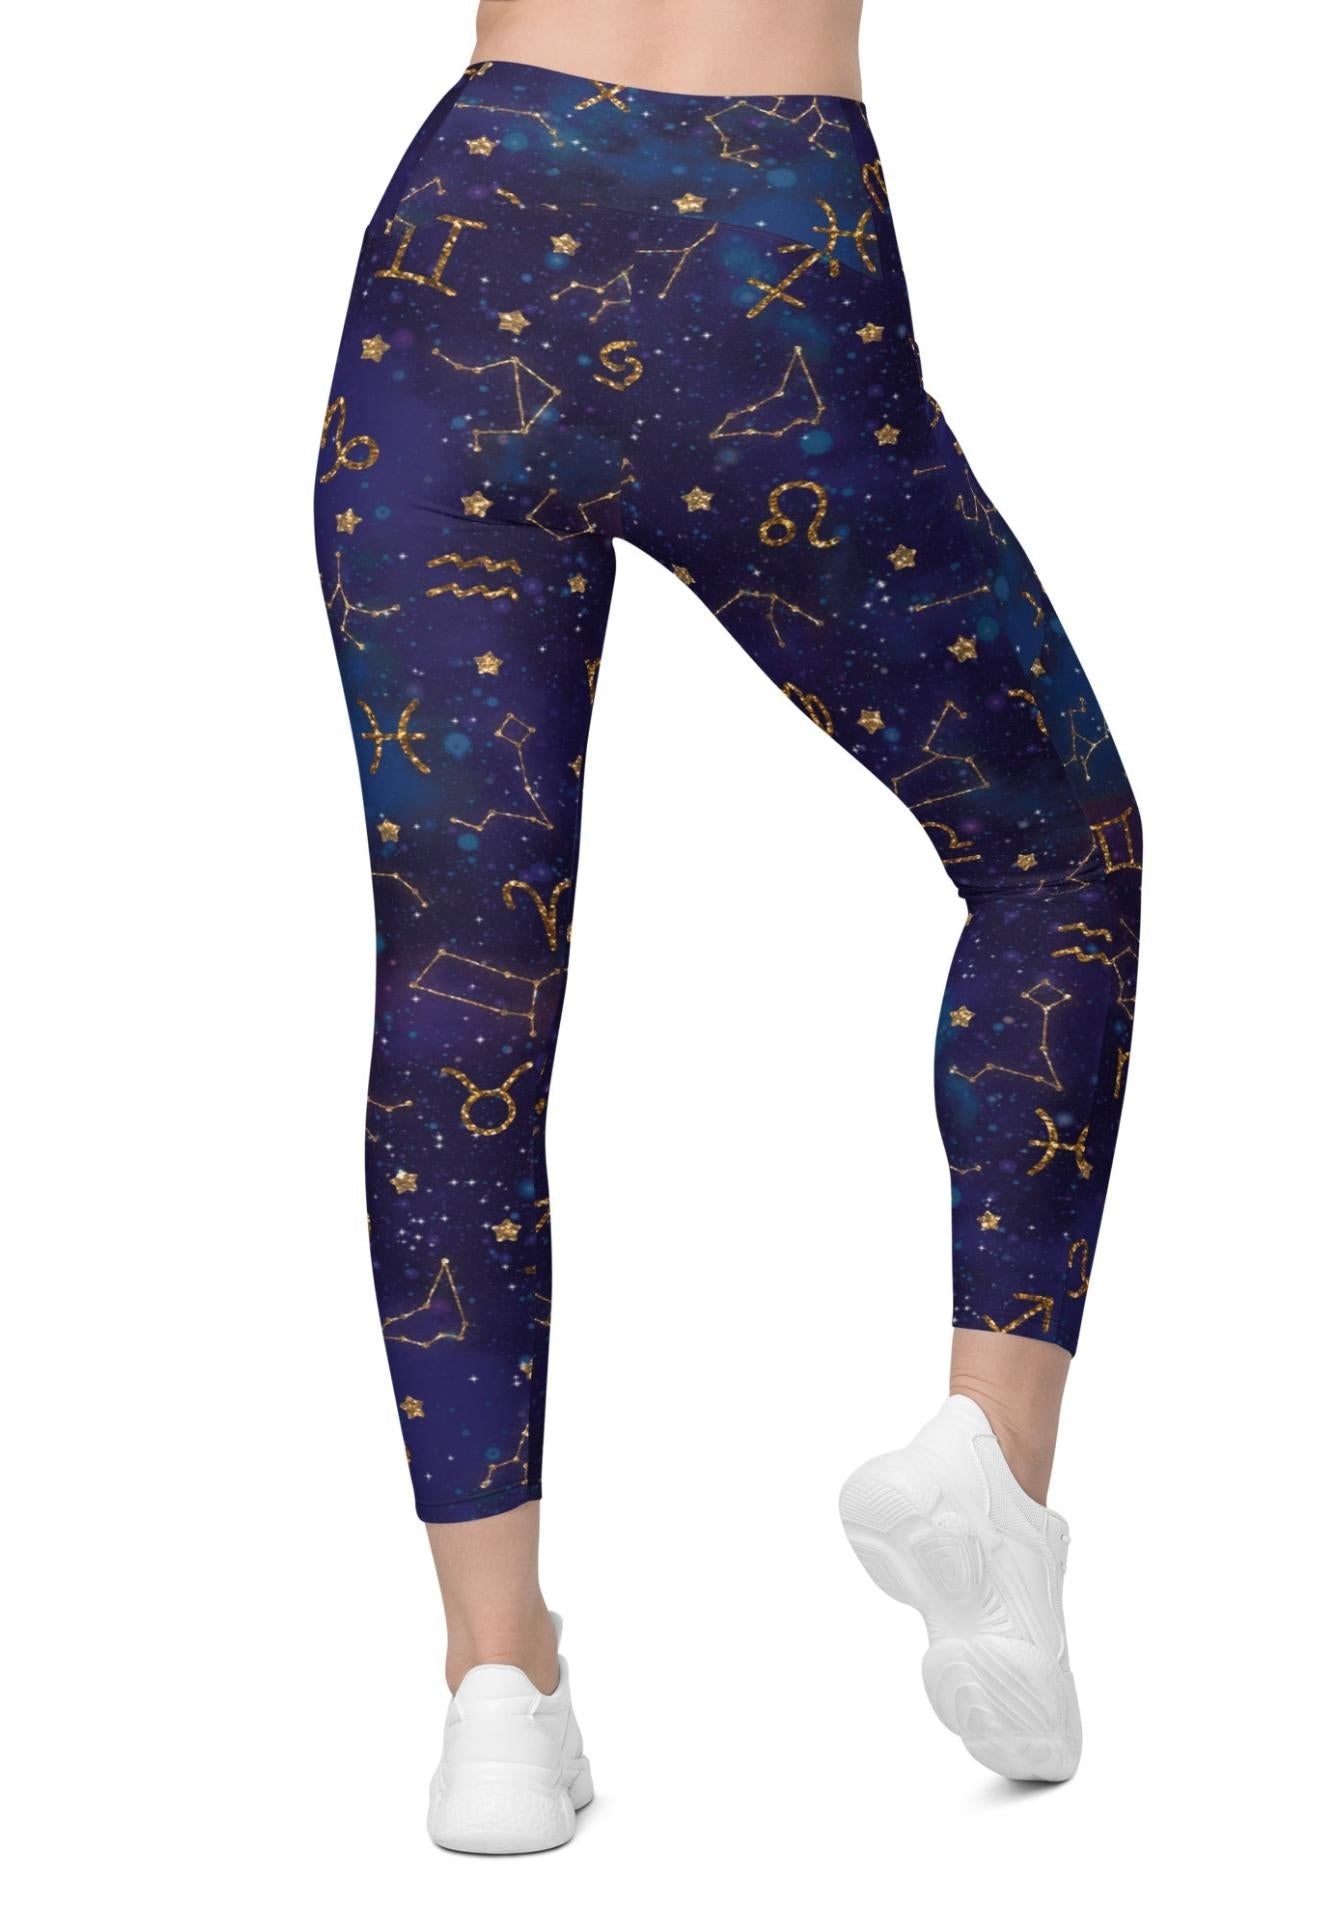 Zodiac Signs Leggings With Pockets